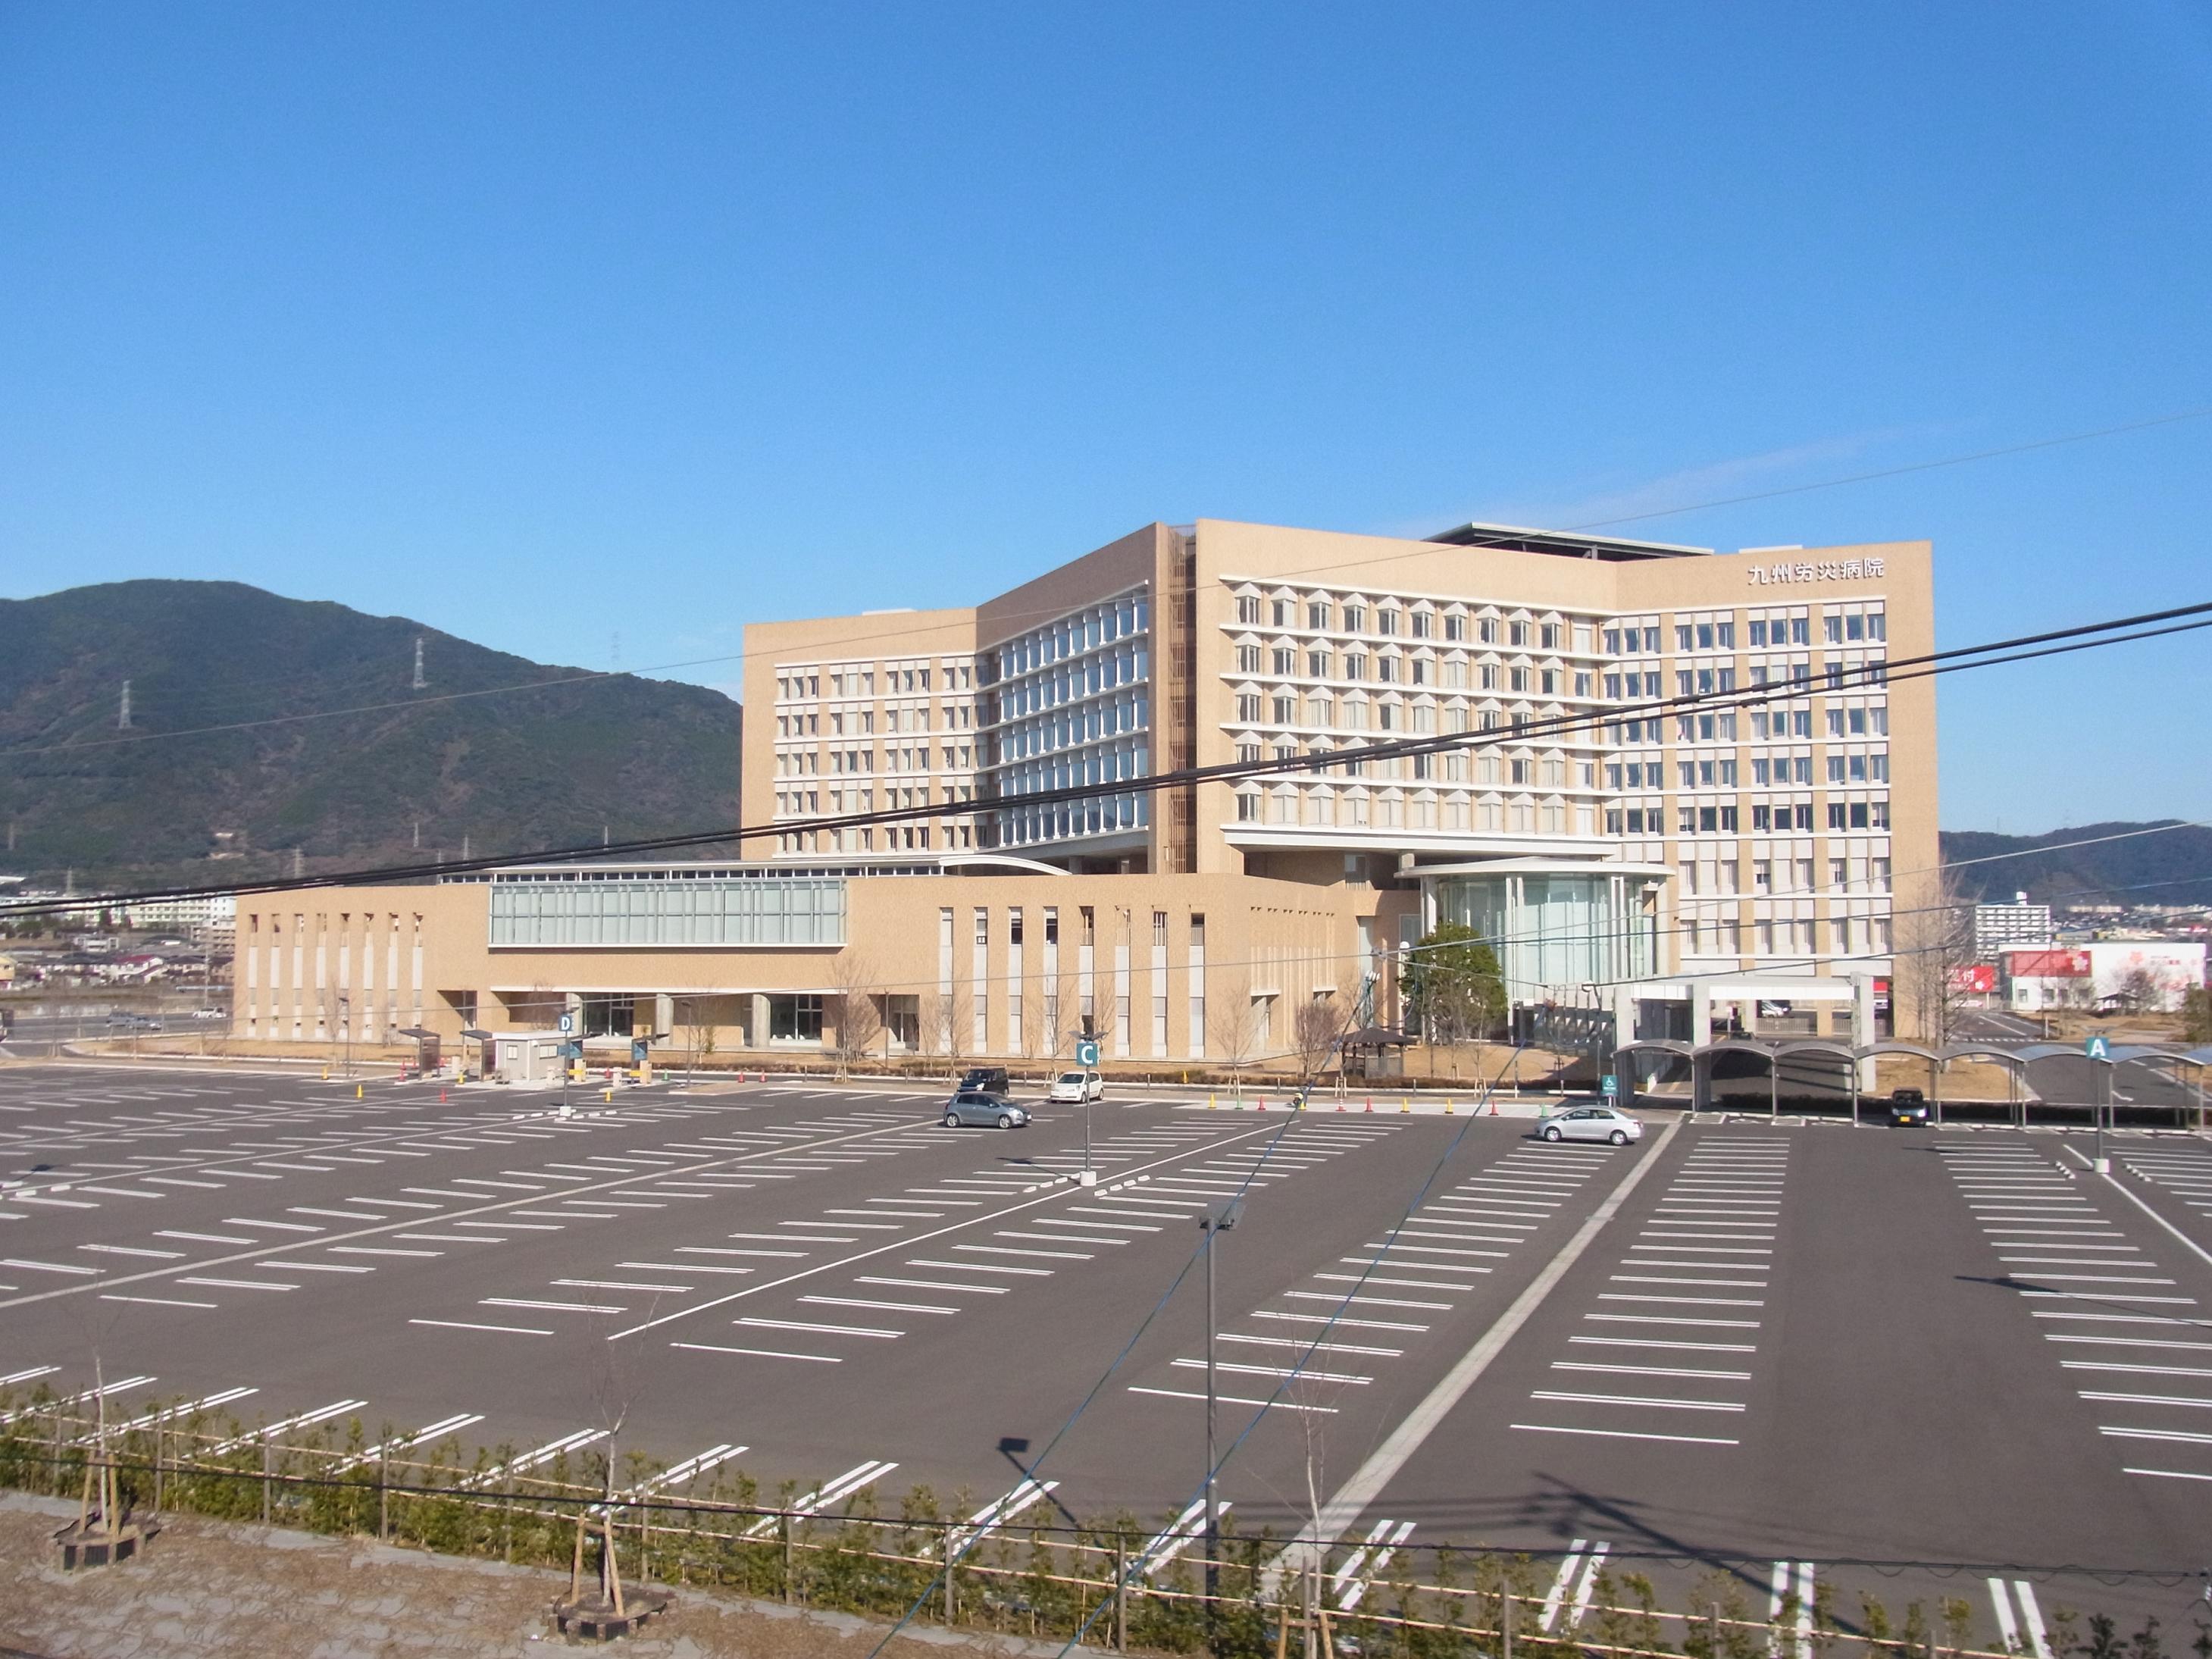 Hospital. 1166m to the National Institute of Labor Health and Welfare Organization Kyushurosaibyoin (hospital)